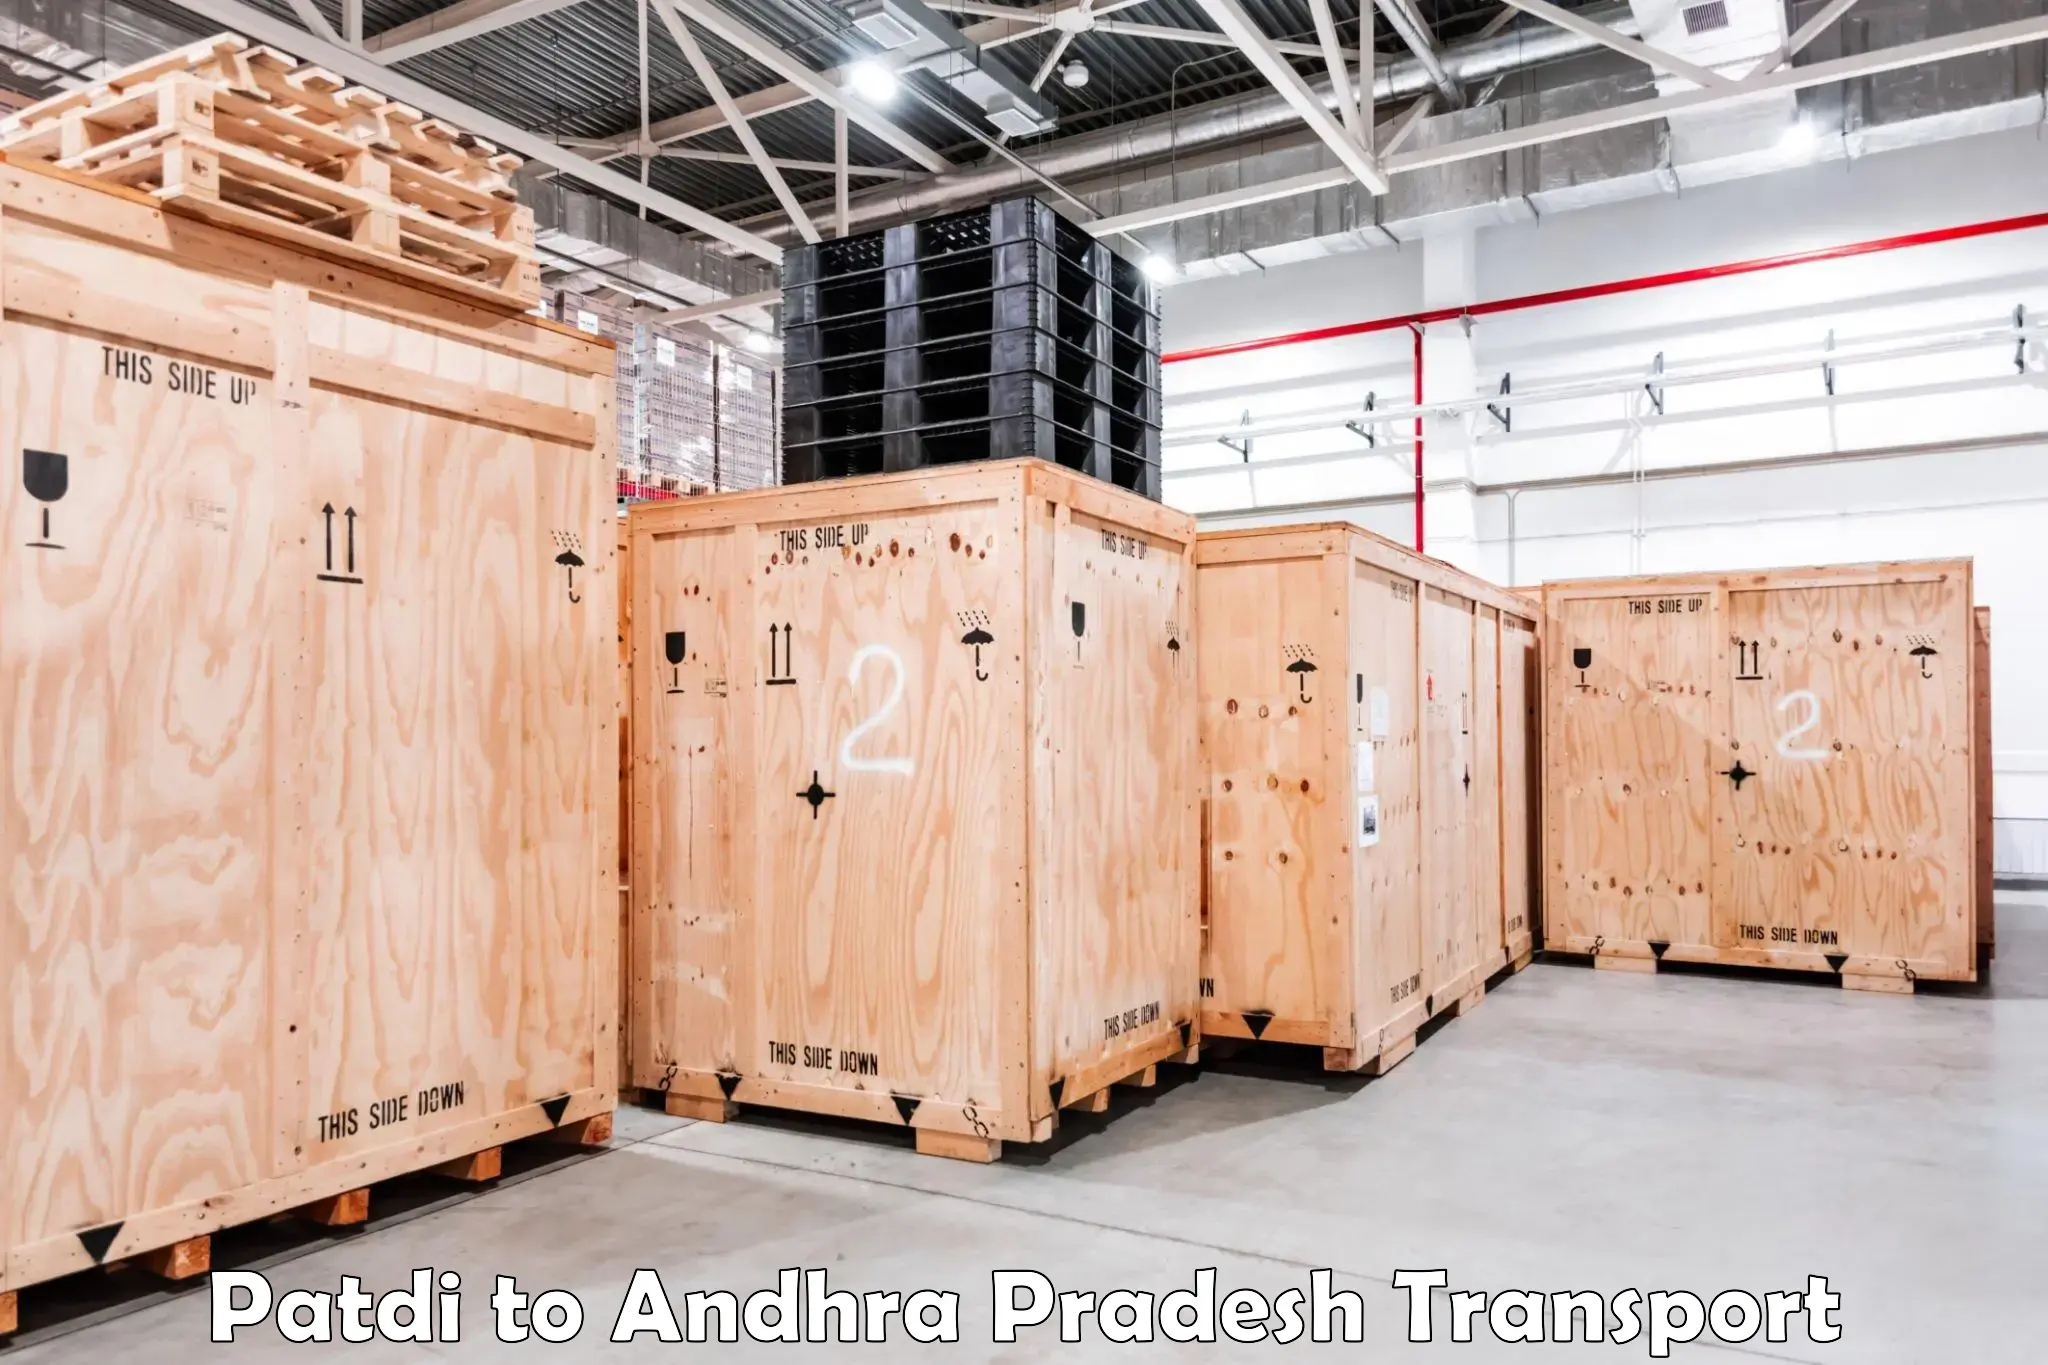 Air freight transport services Patdi to Rajahmundry